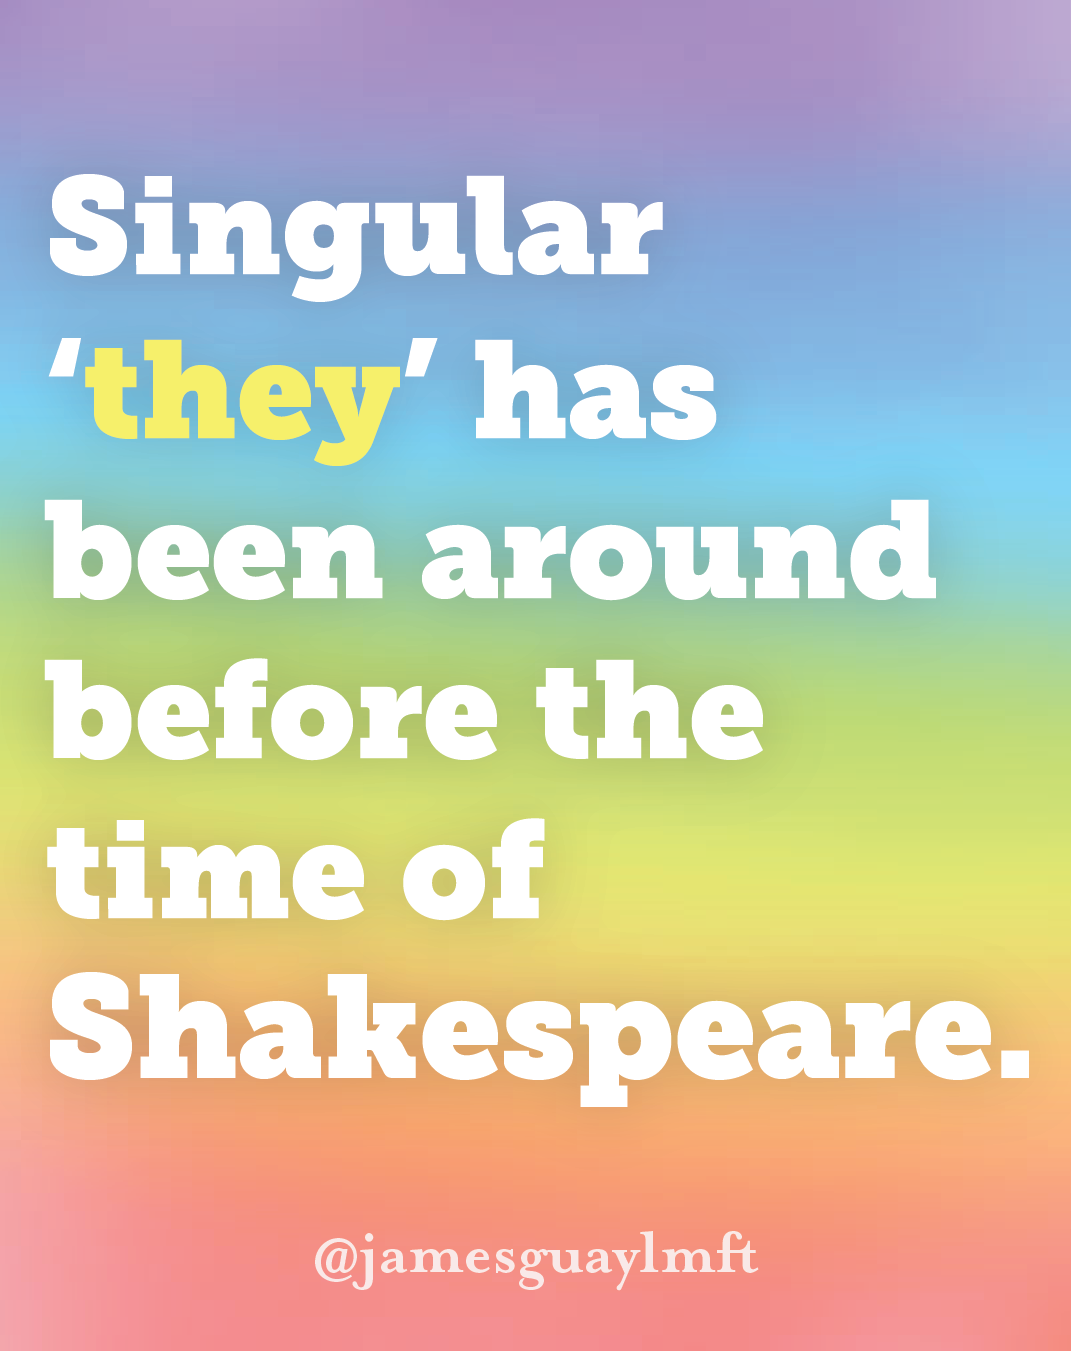 Singular they and Shakespeare